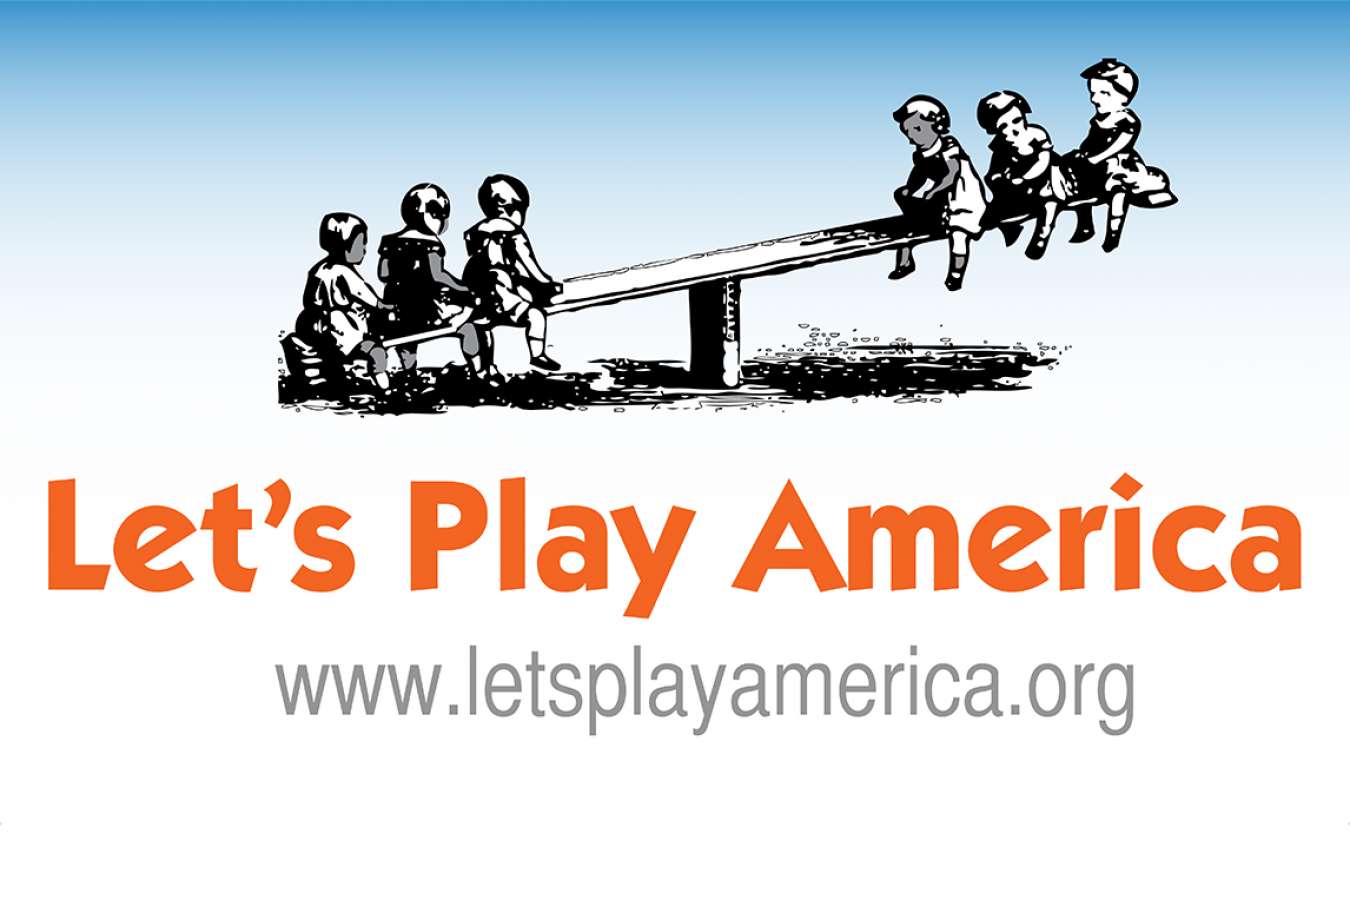 logo 20 : Let's Play America promotes play for people of all ages